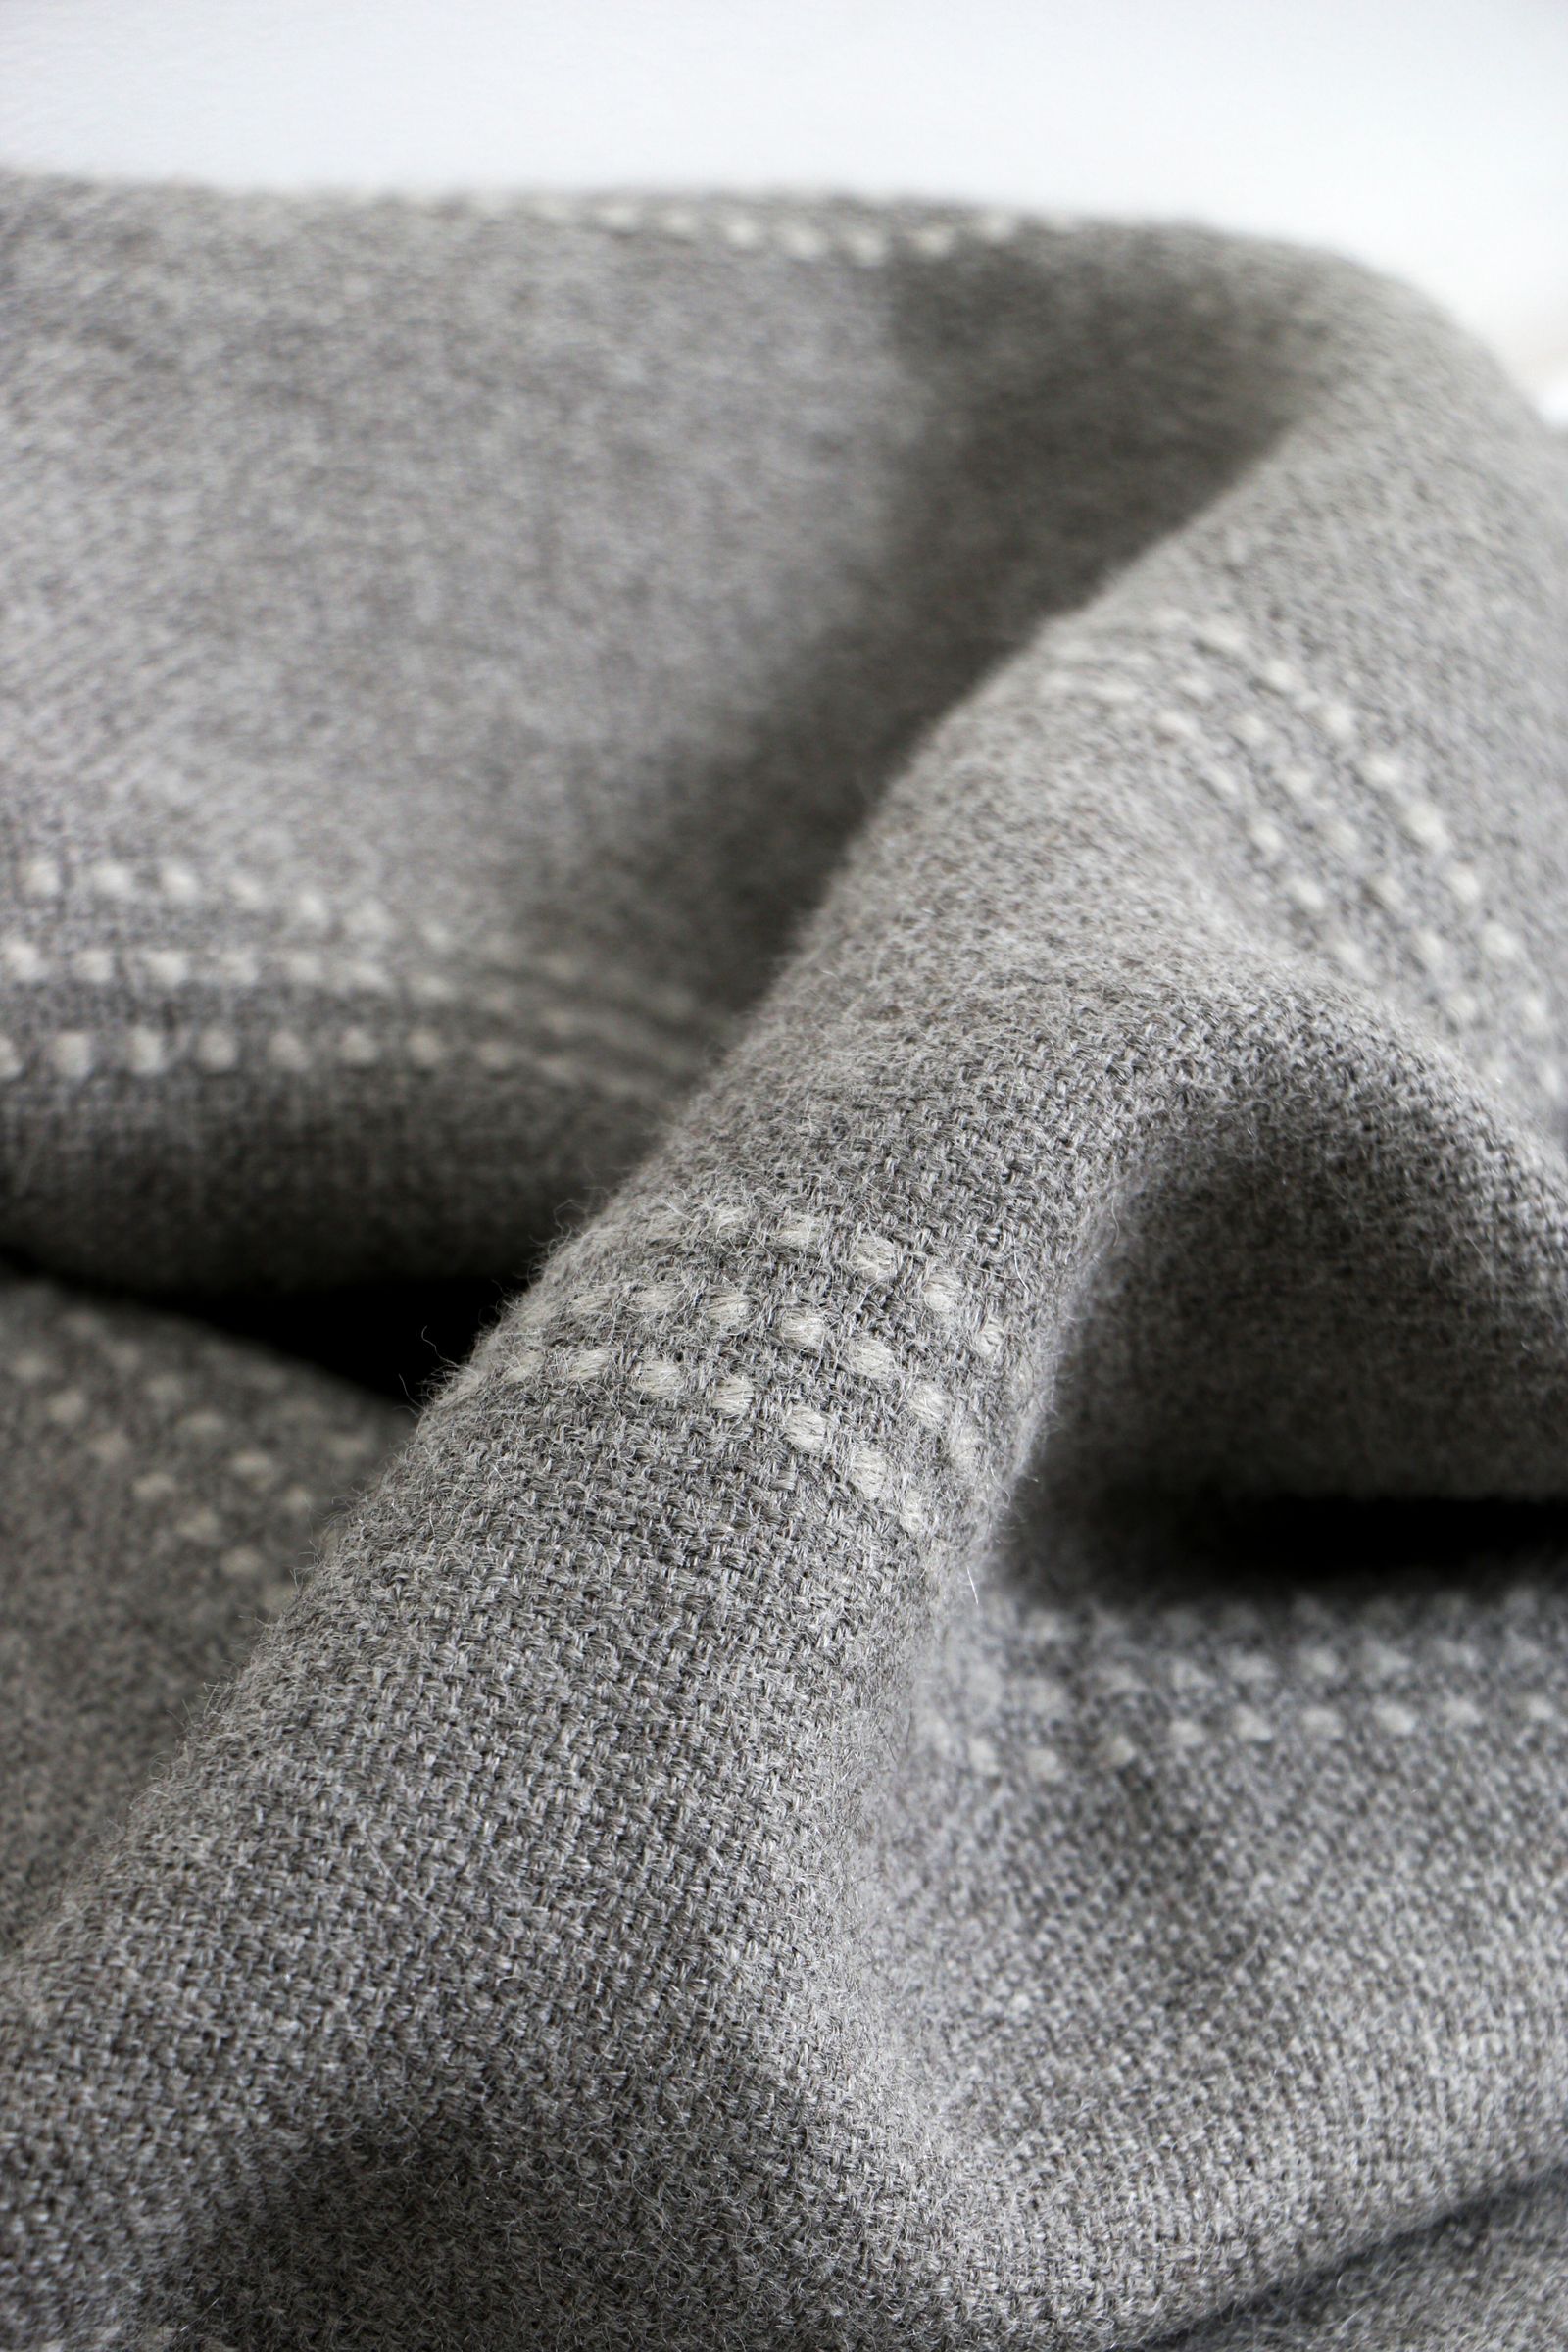 THE INOUE BROTHERS - THE INOUE BROTHERS Blanket Stripe Grey